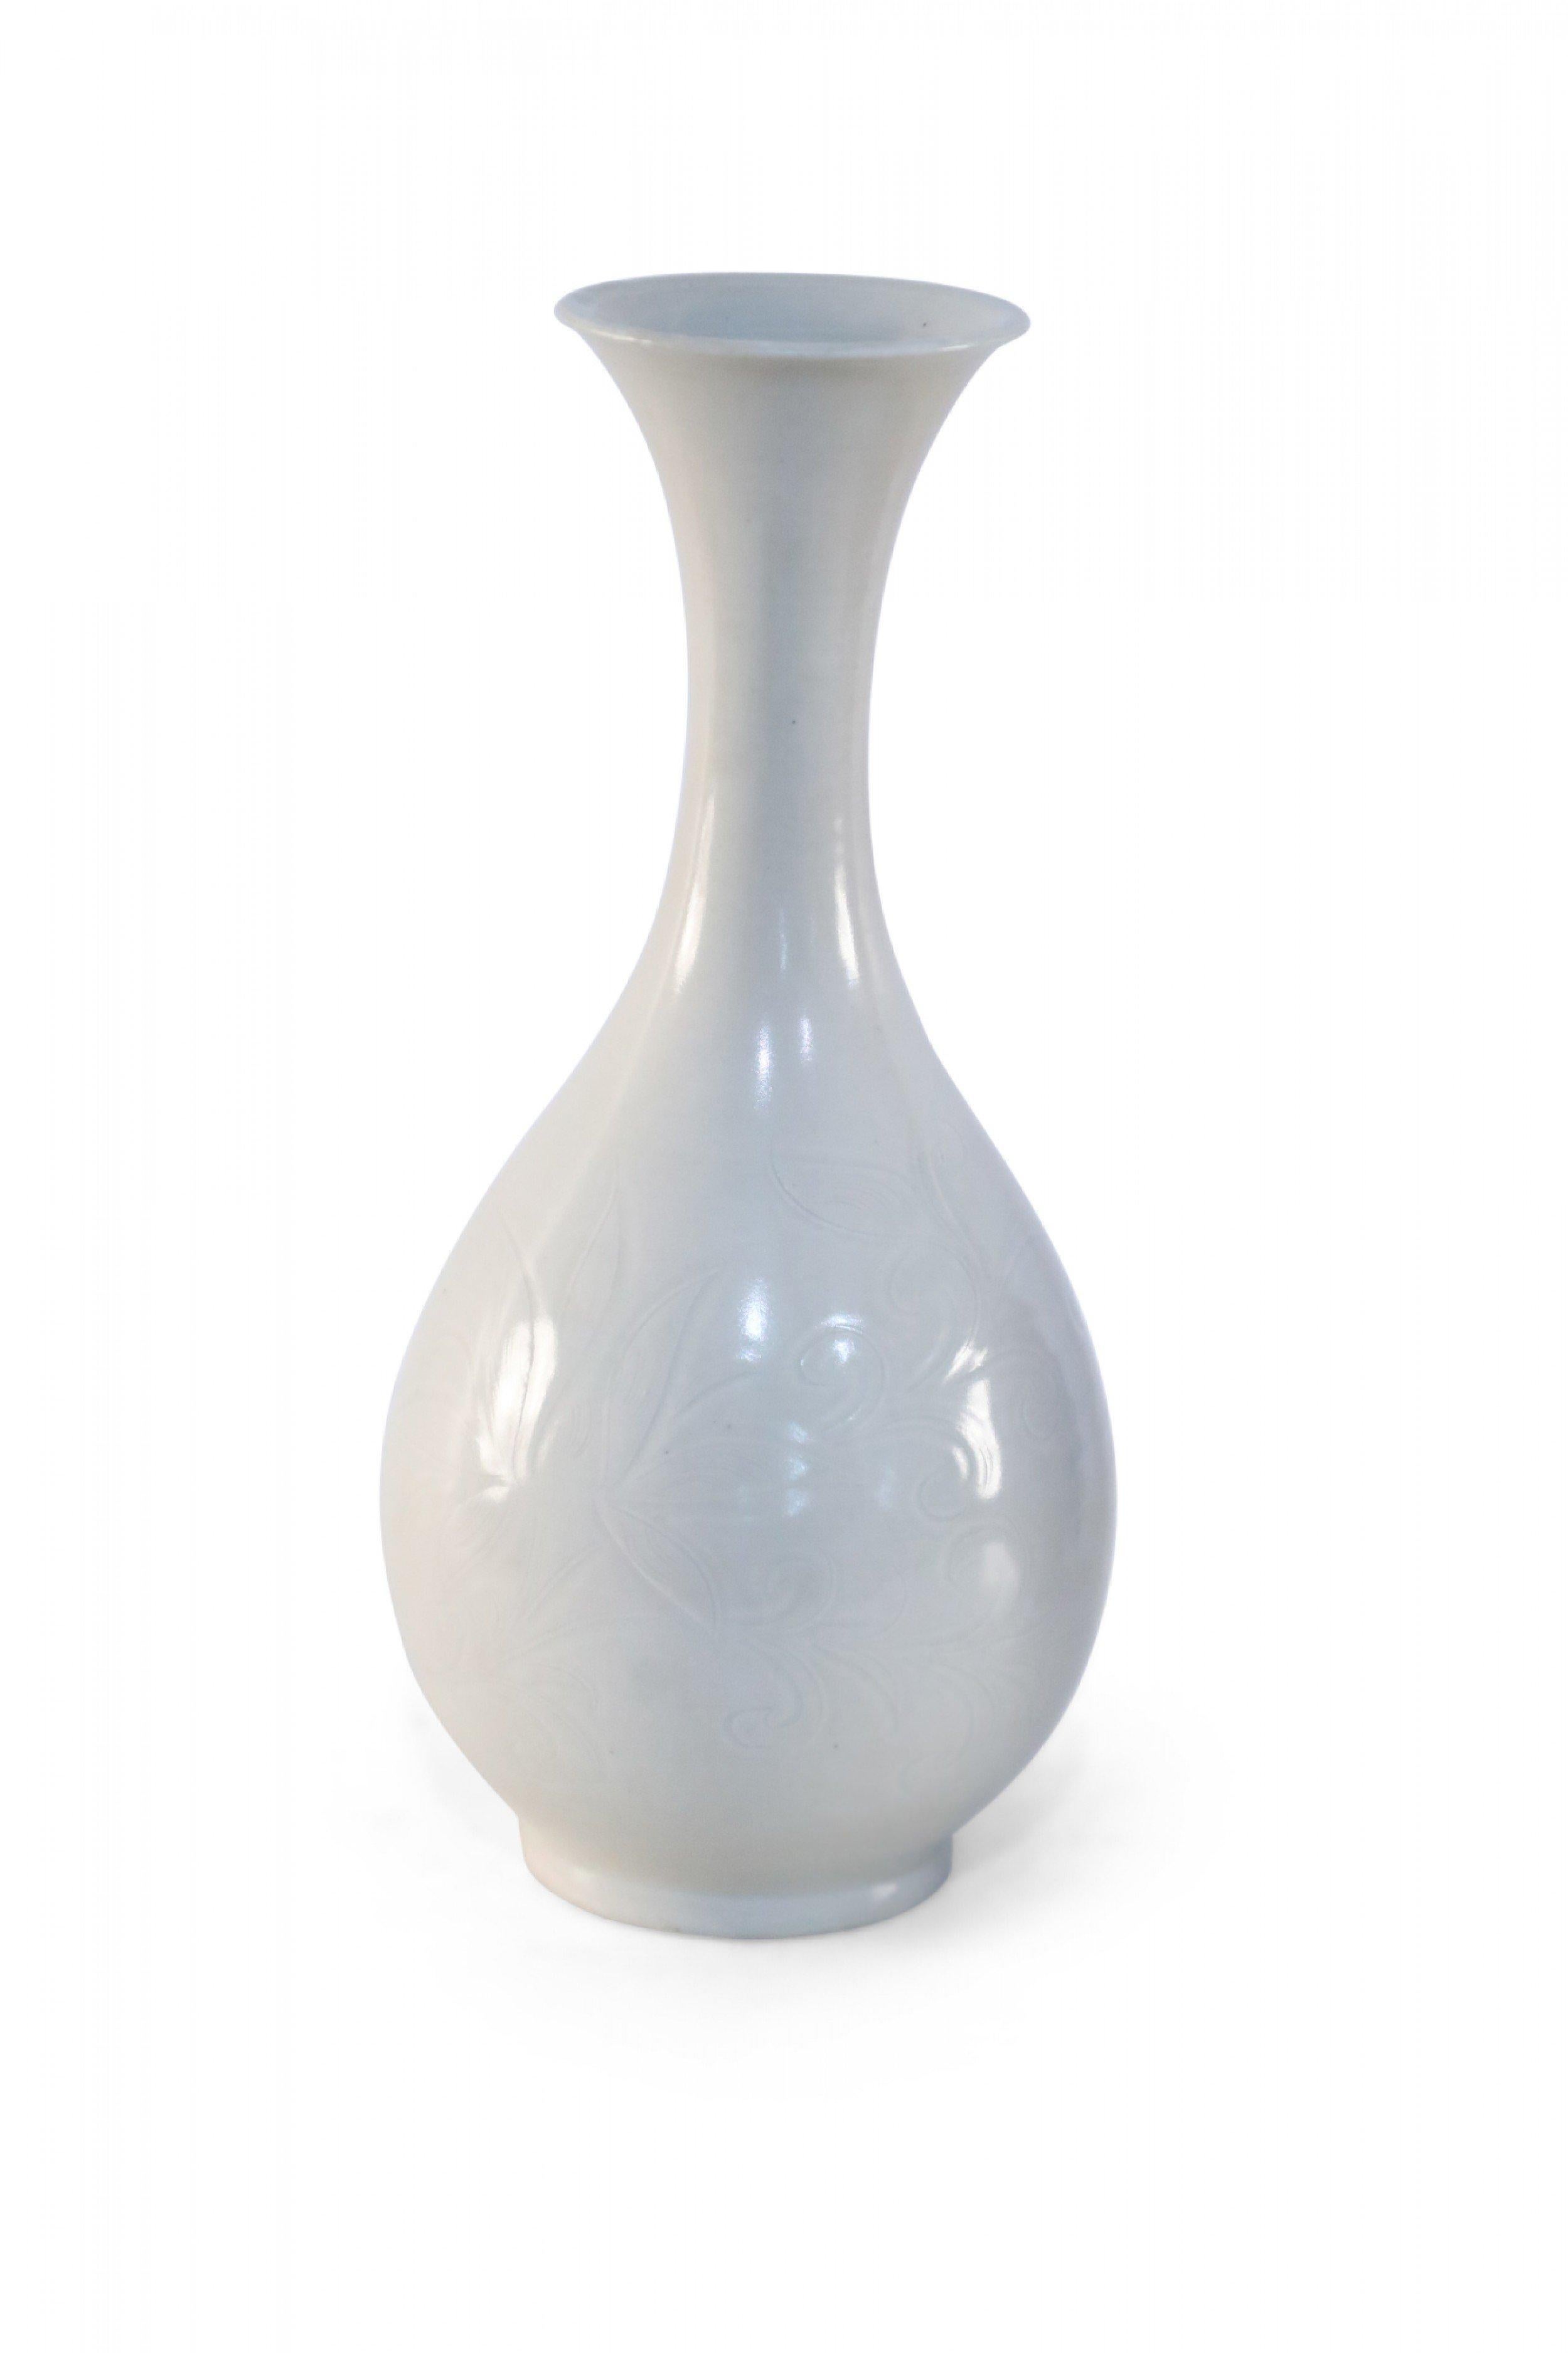 Chinese Off-White and Tonal Patterned Porcelain Vase In Good Condition For Sale In New York, NY